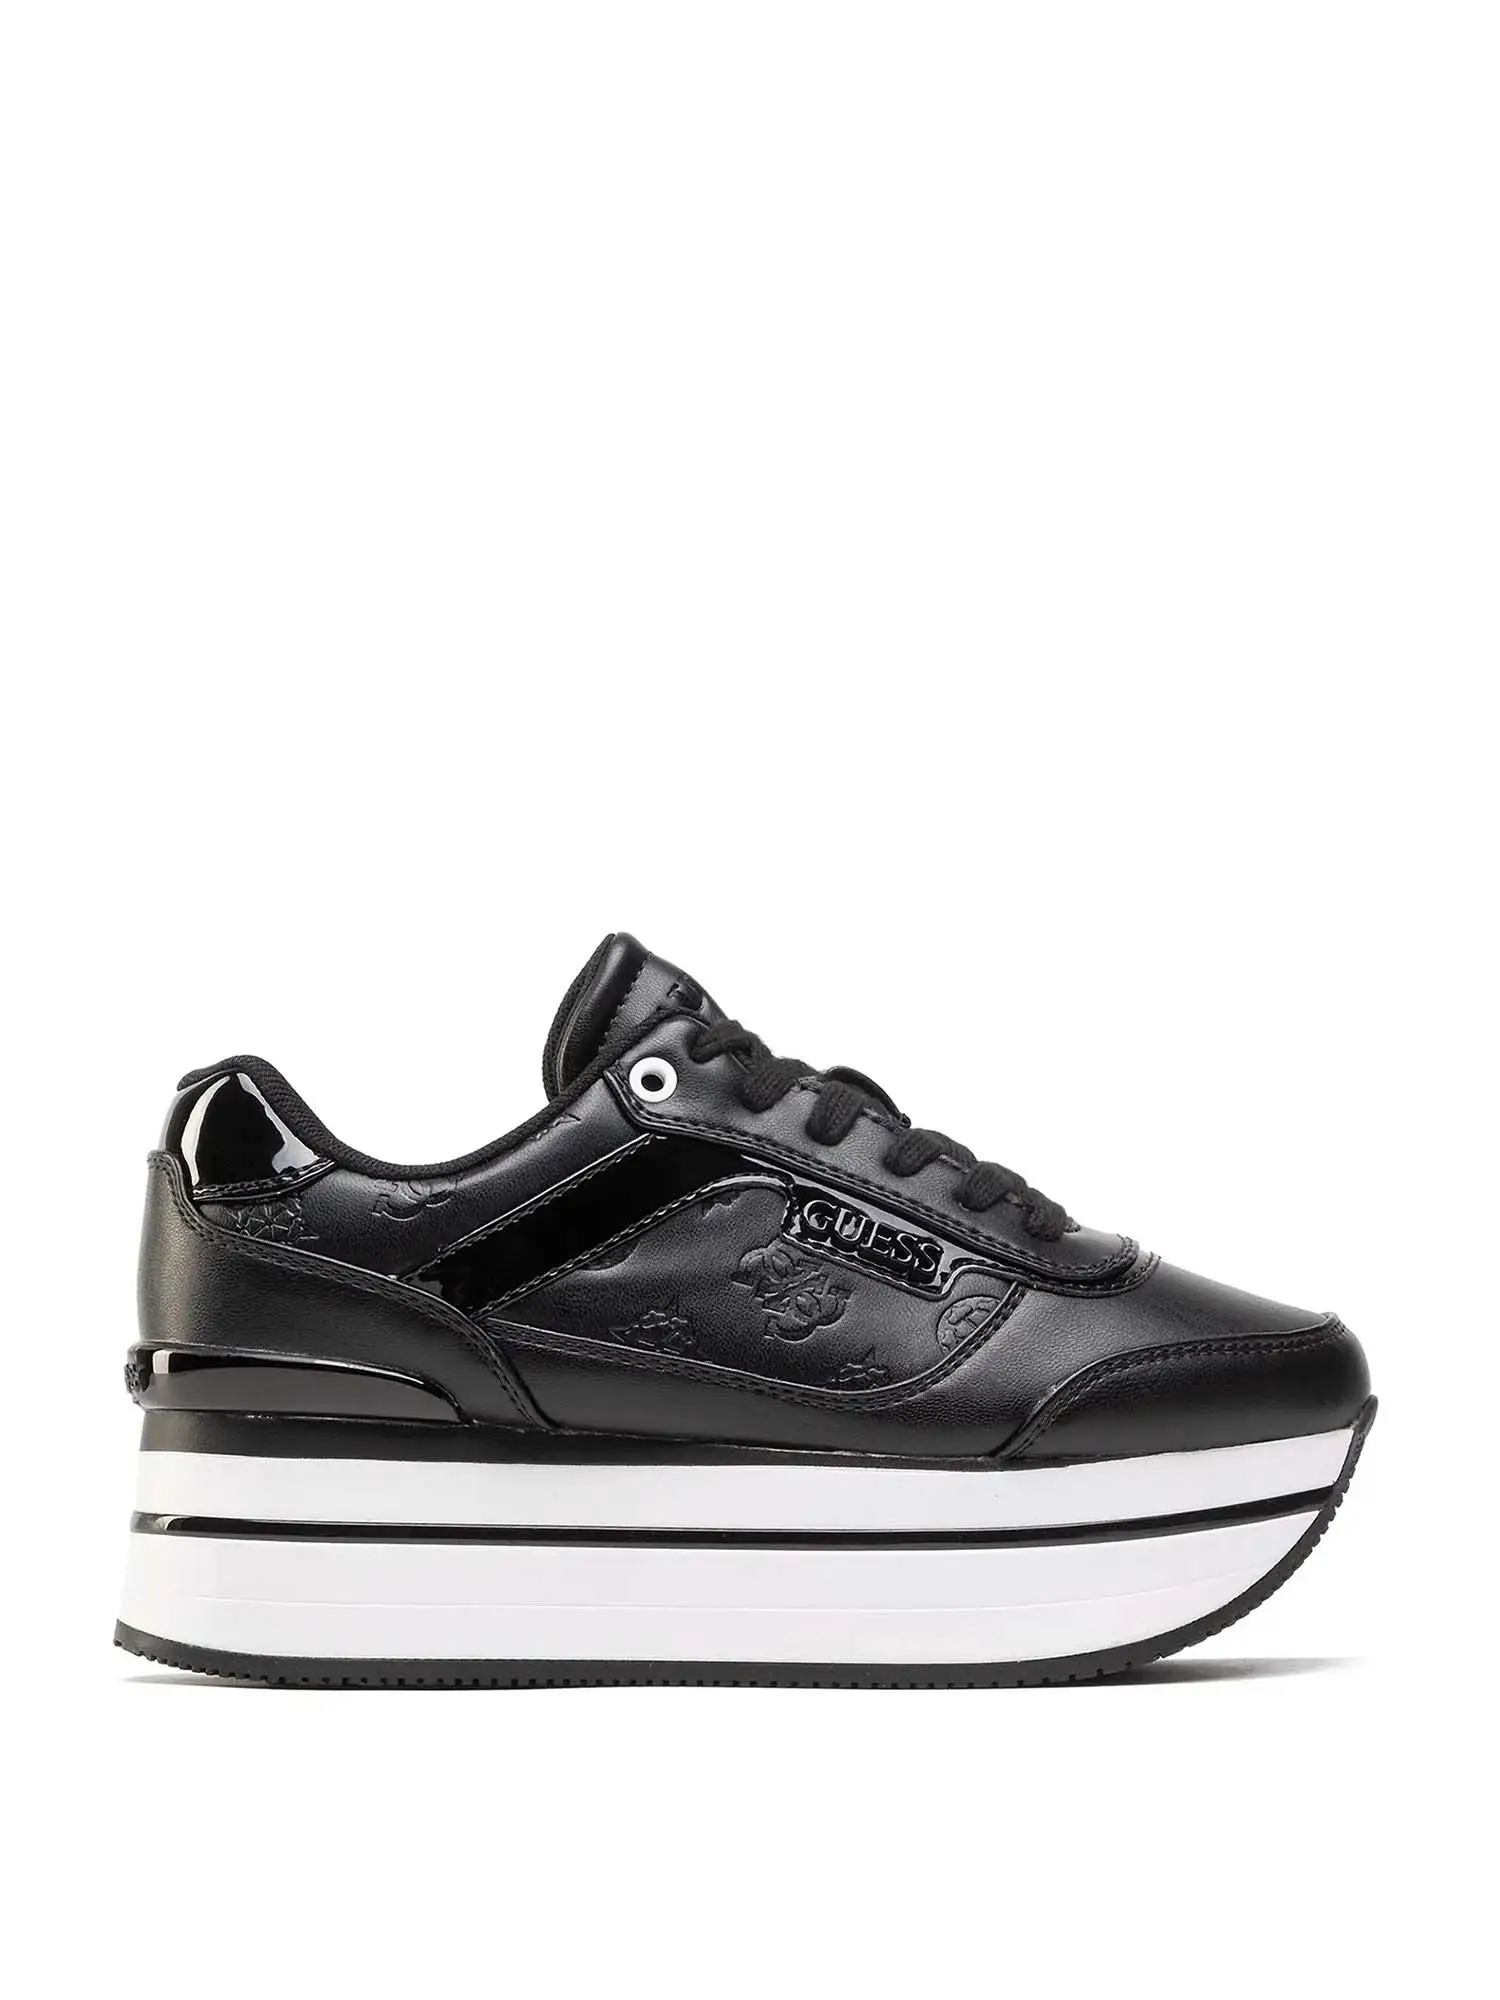 SNEAKERS DONNA - GUESS - FL5HNS PEL12 - NERO, 40